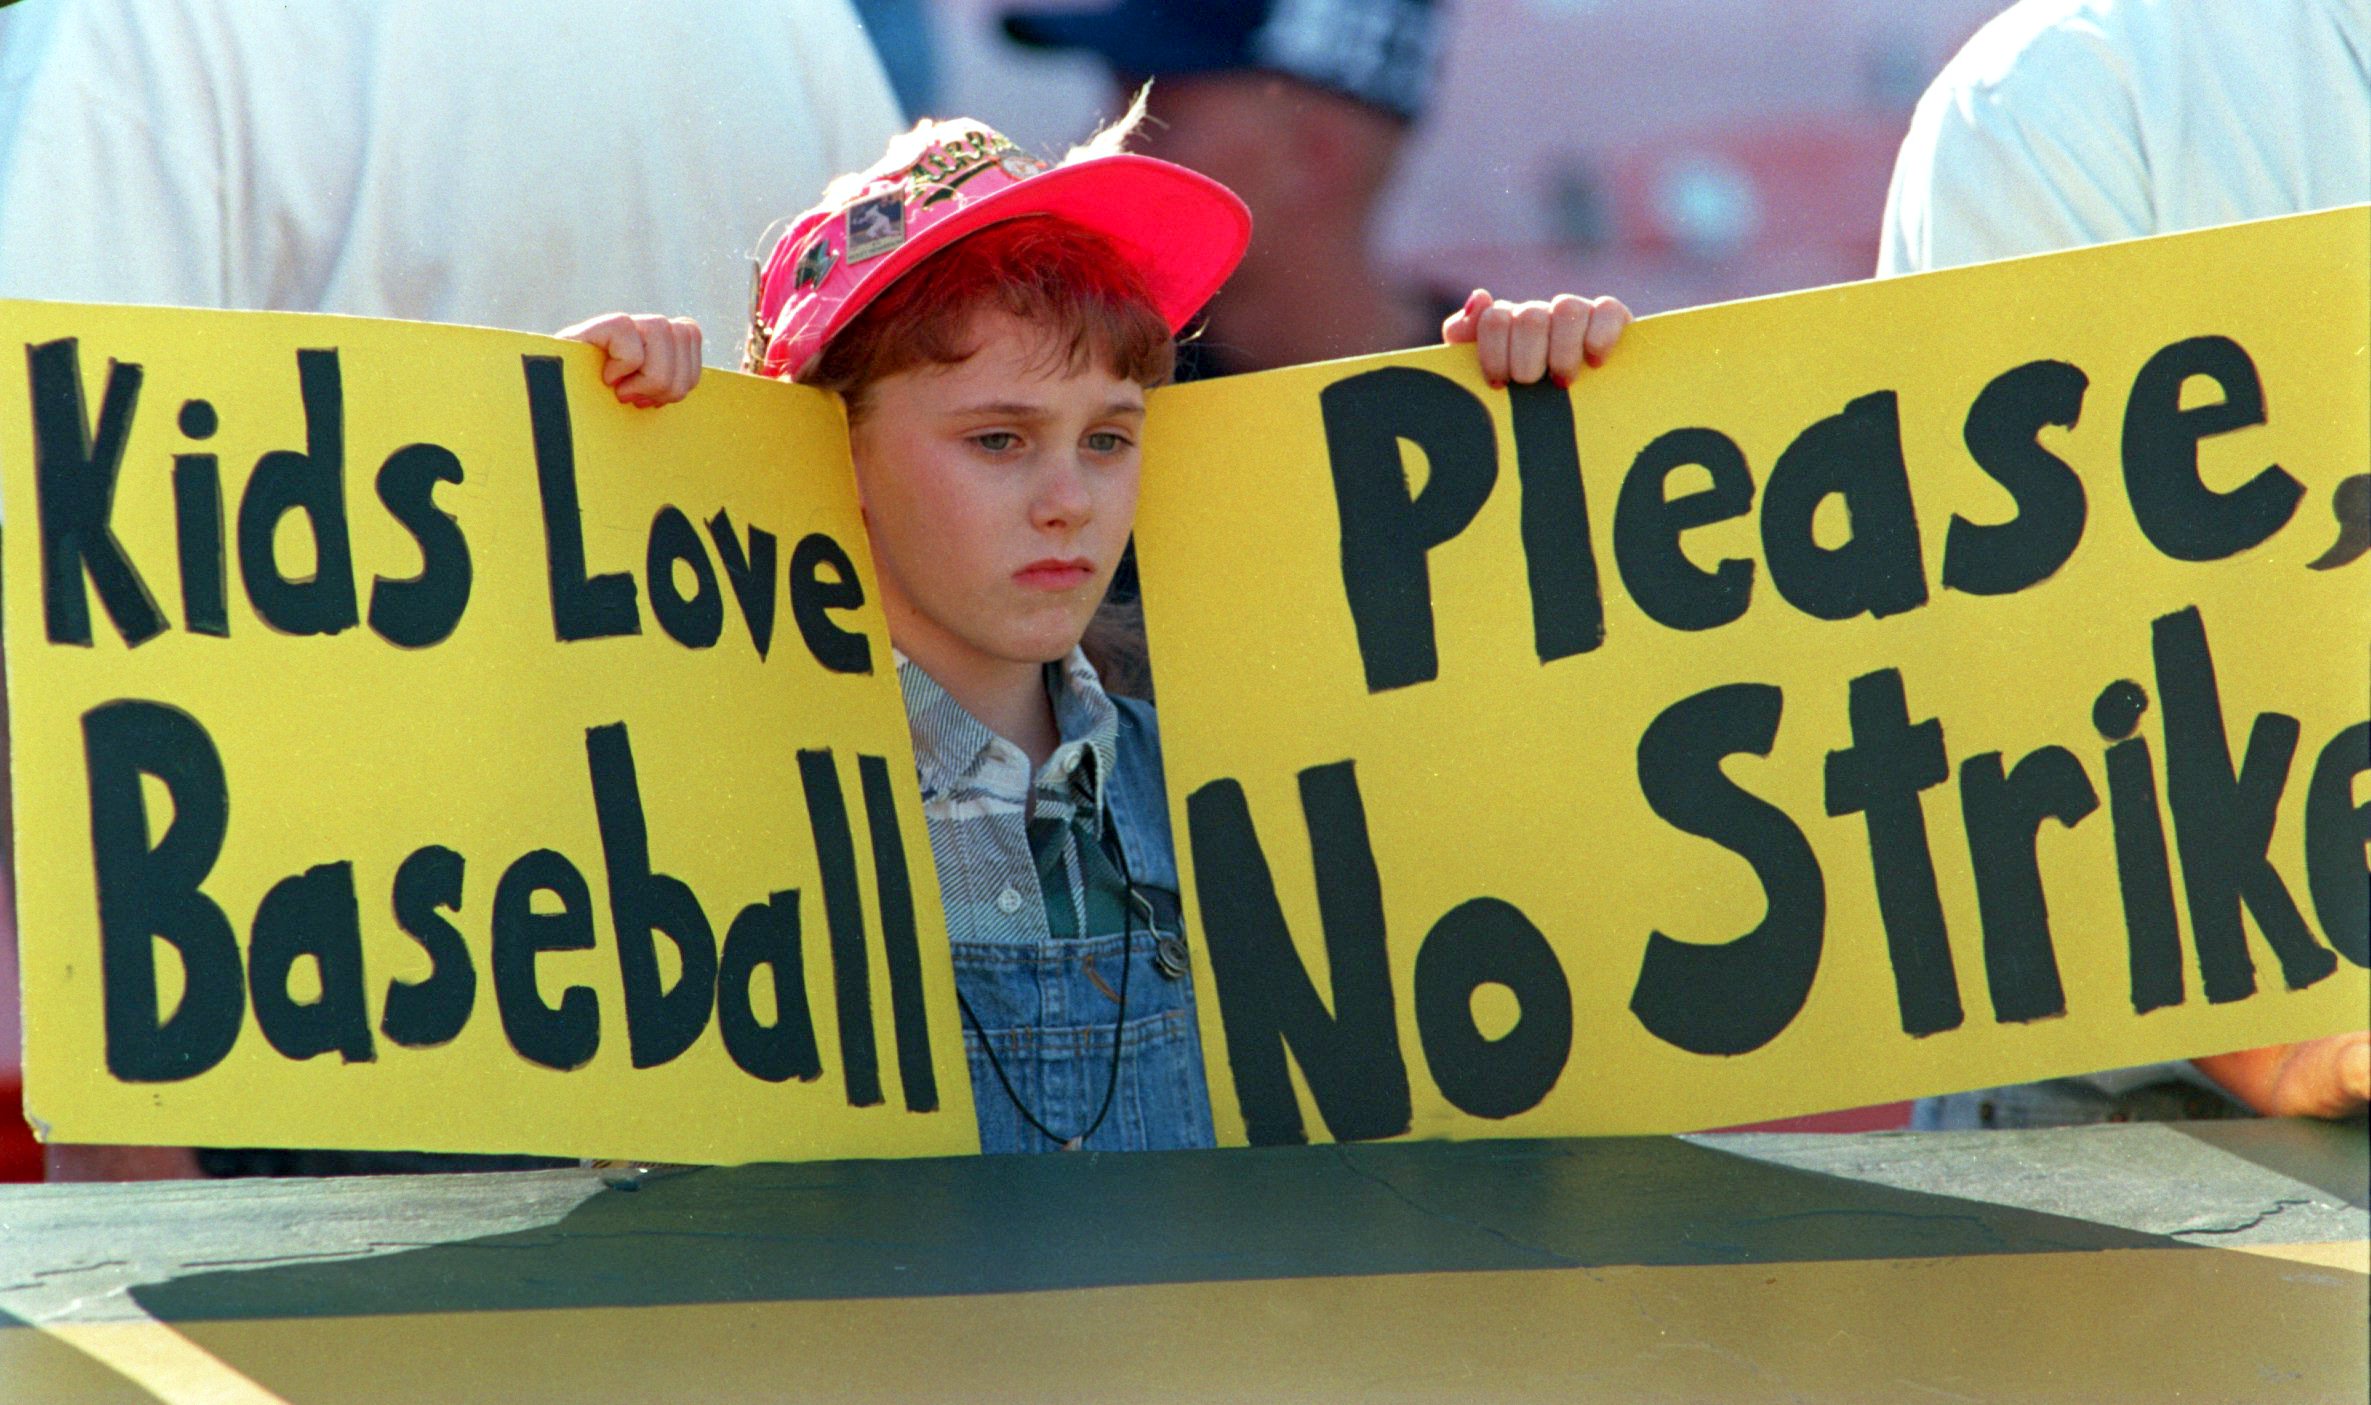 11 Aug 1994: ERIN STATES, 10, OF TRACY, CALIFORNIA SHOWS HER DISAPROVAL OF THE BASEBALL STRIKE BEFORE THE ATHLETICS V MARINERS GAME IN OAKLAND.